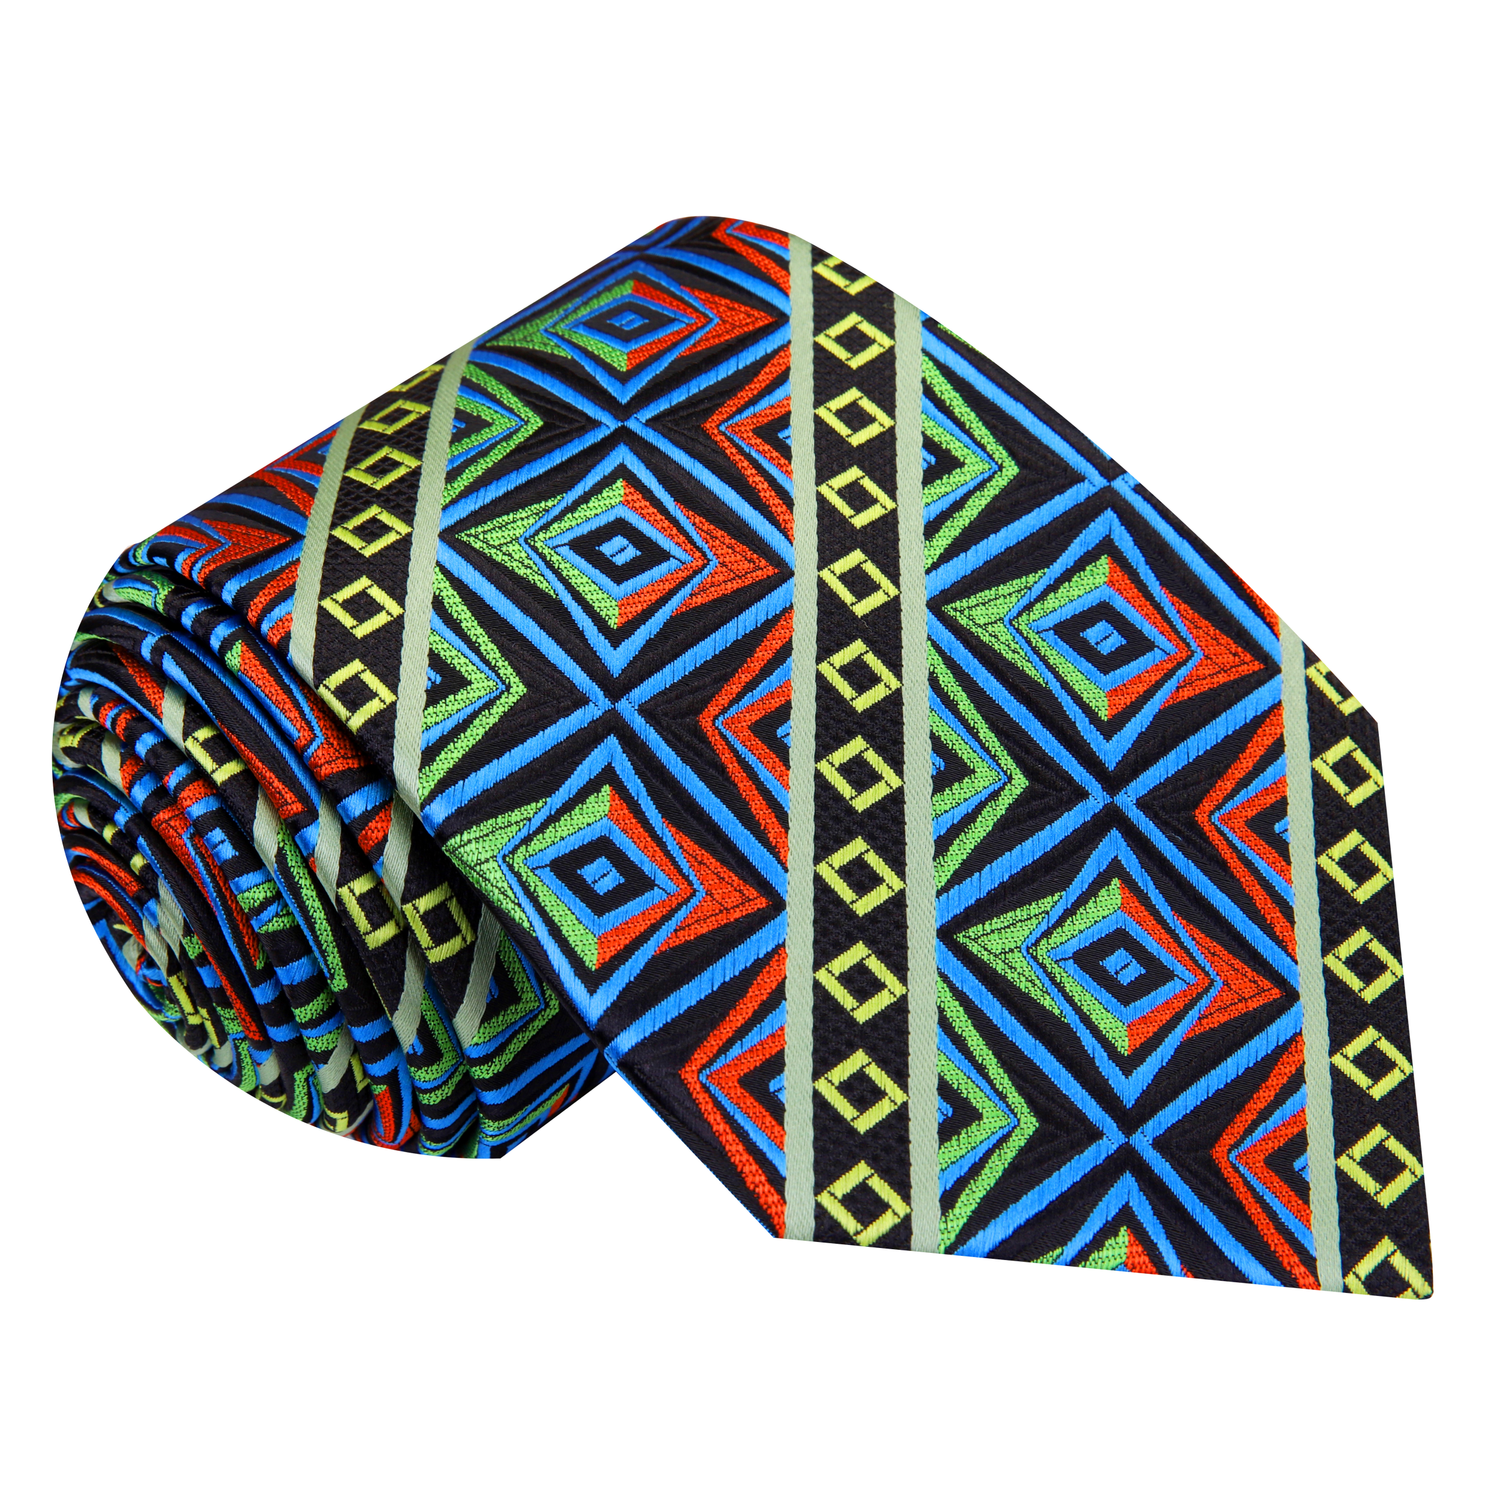 A Green, Orange, Yellow, Blue, Black Abstract Geometric Shapes And Squares Pattern Silk Necktie